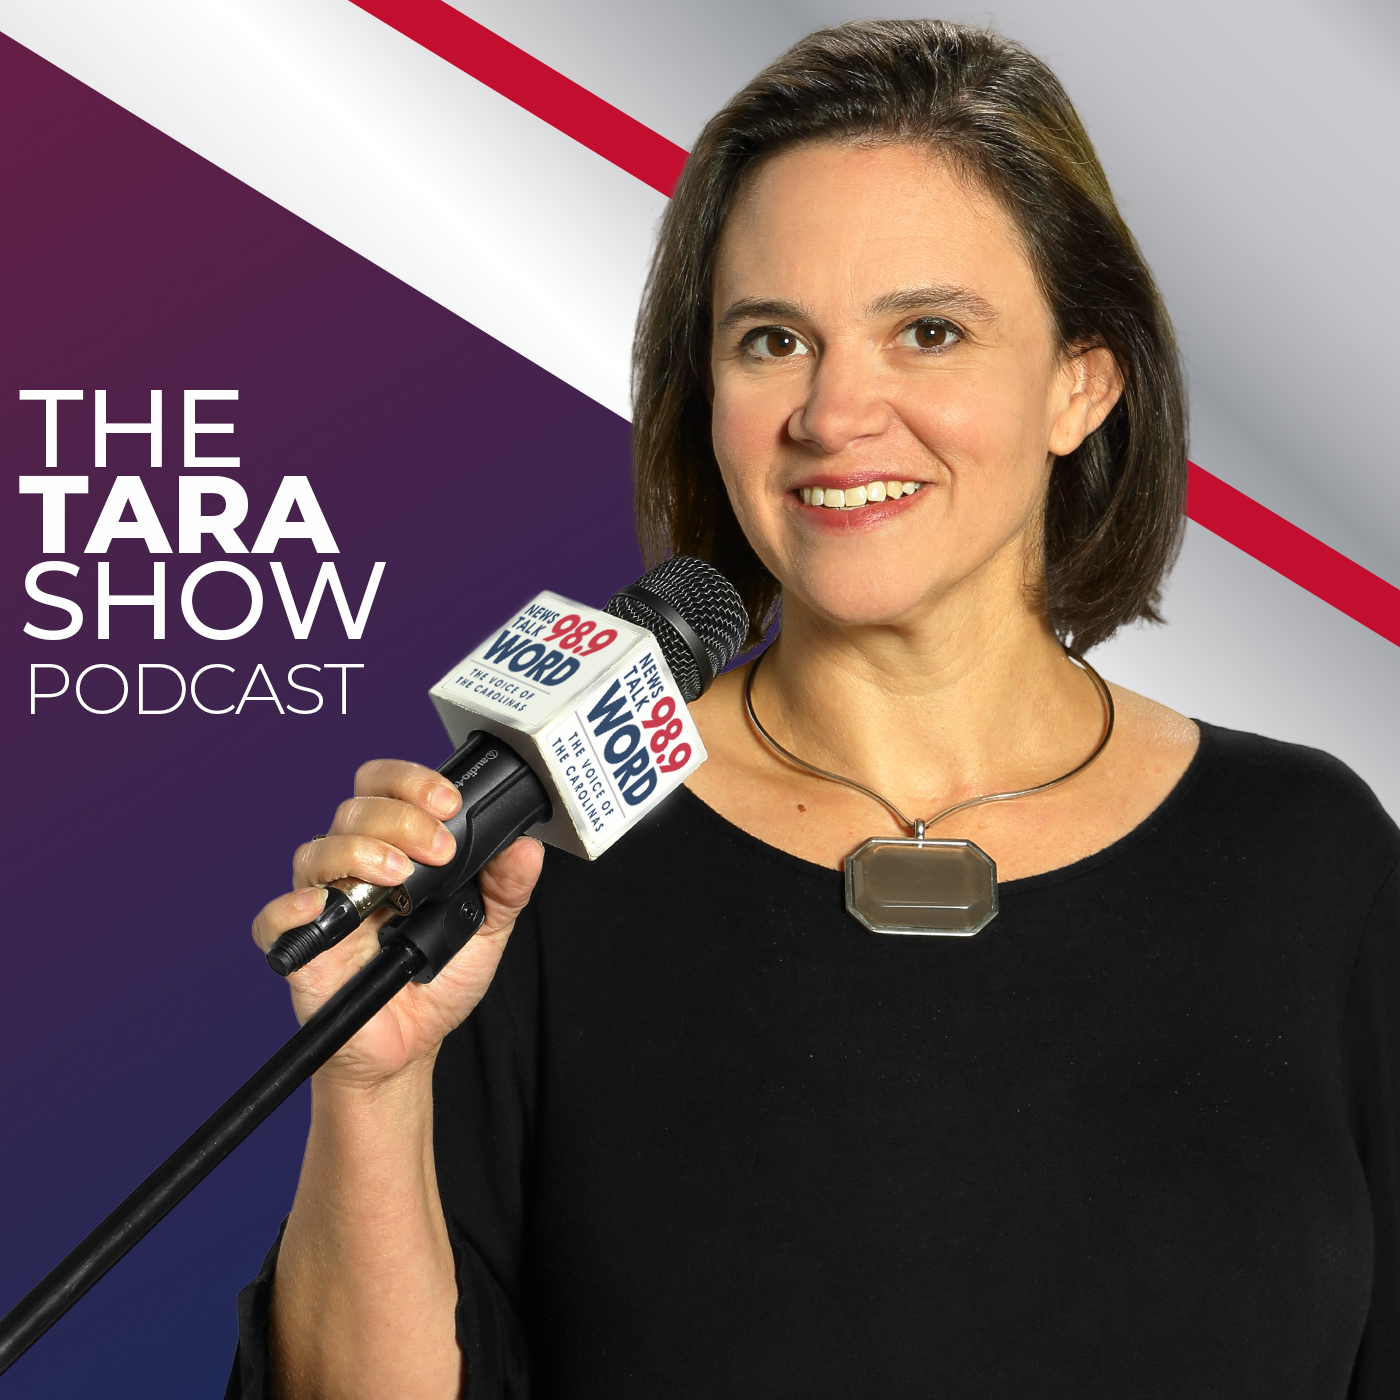 Hour 2: The Tara Show - “Where are they Getting this Money” “Harrison Butker’s Opinion” “Libs who Back Hamas” “Defense for Biden”